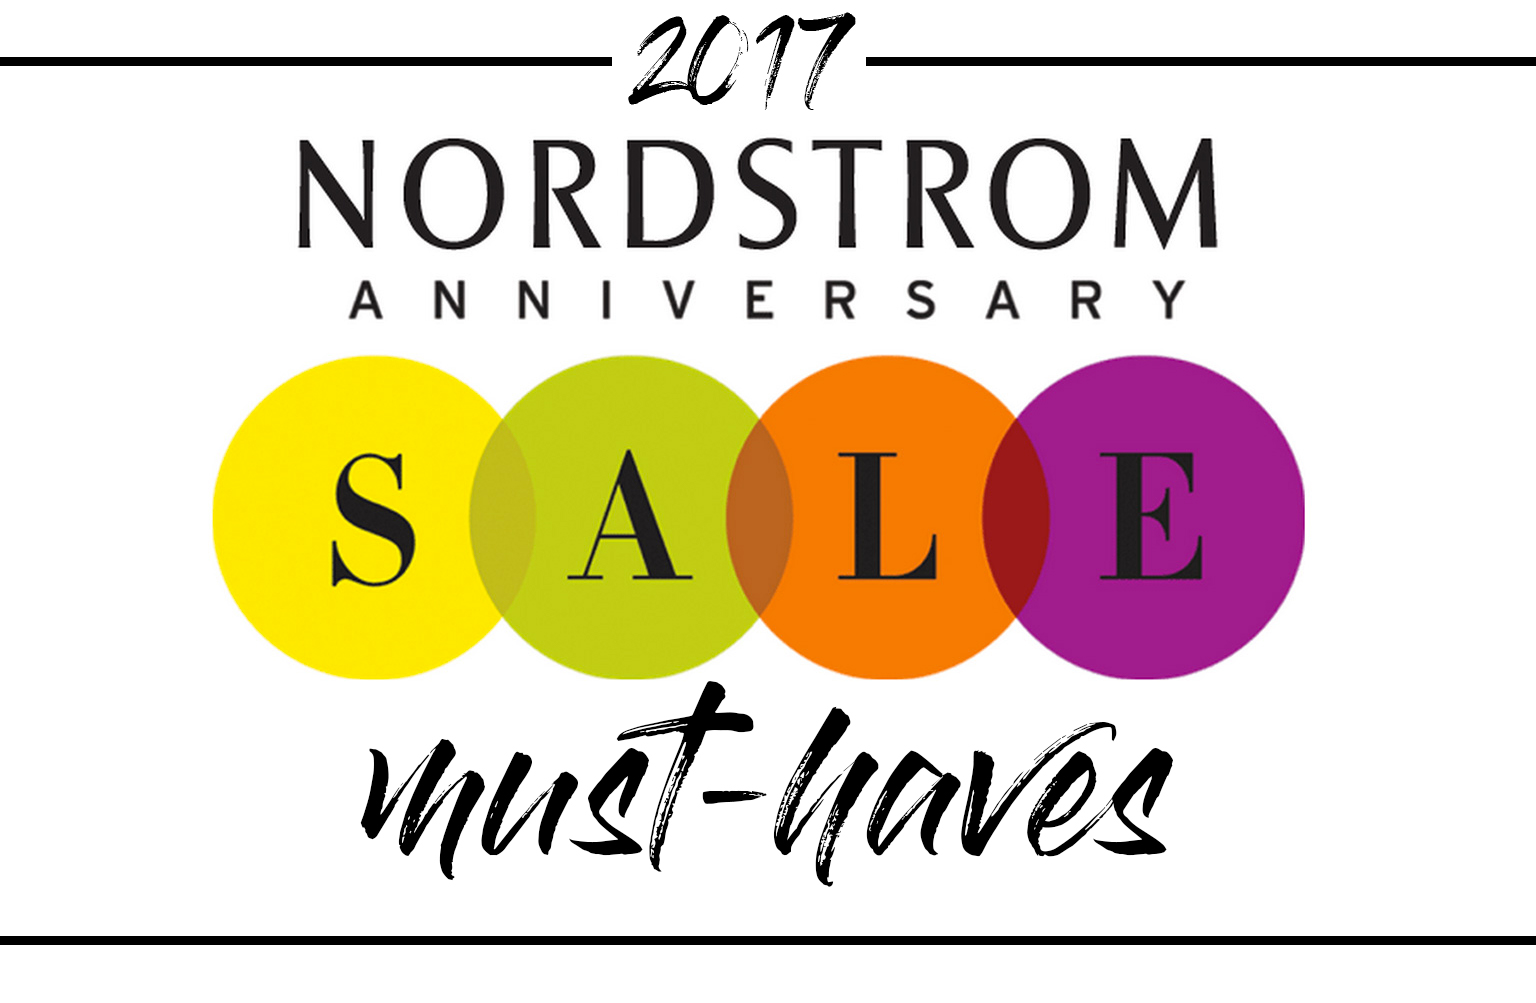 A2F Nordstrom Anniversary Sale Picks Feature Image